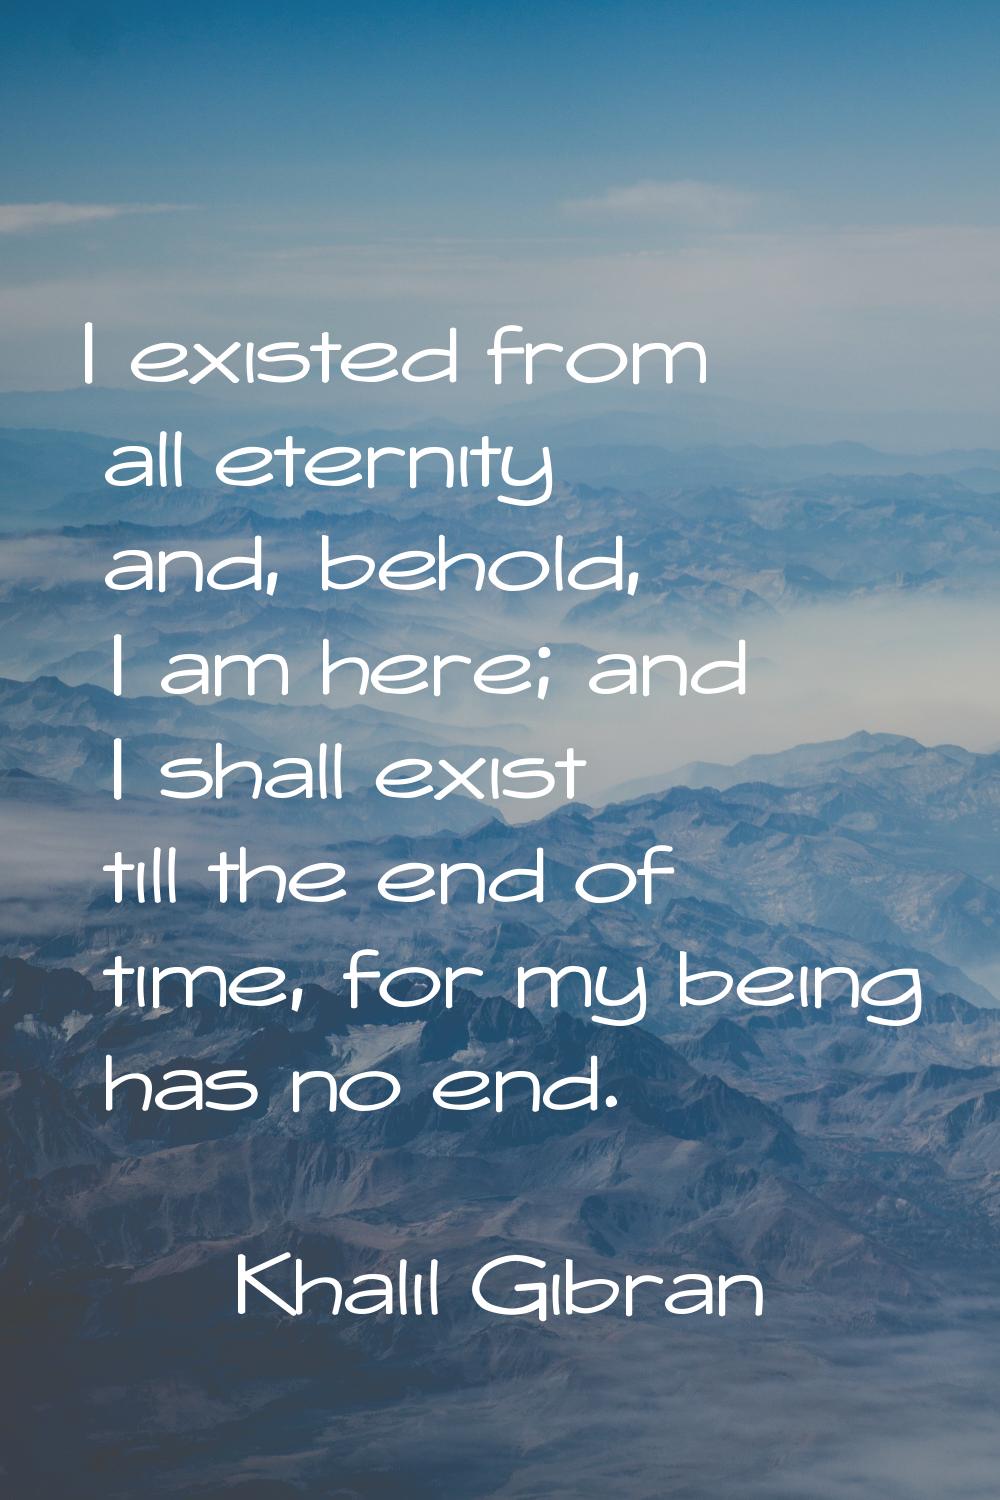 I existed from all eternity and, behold, I am here; and I shall exist till the end of time, for my 